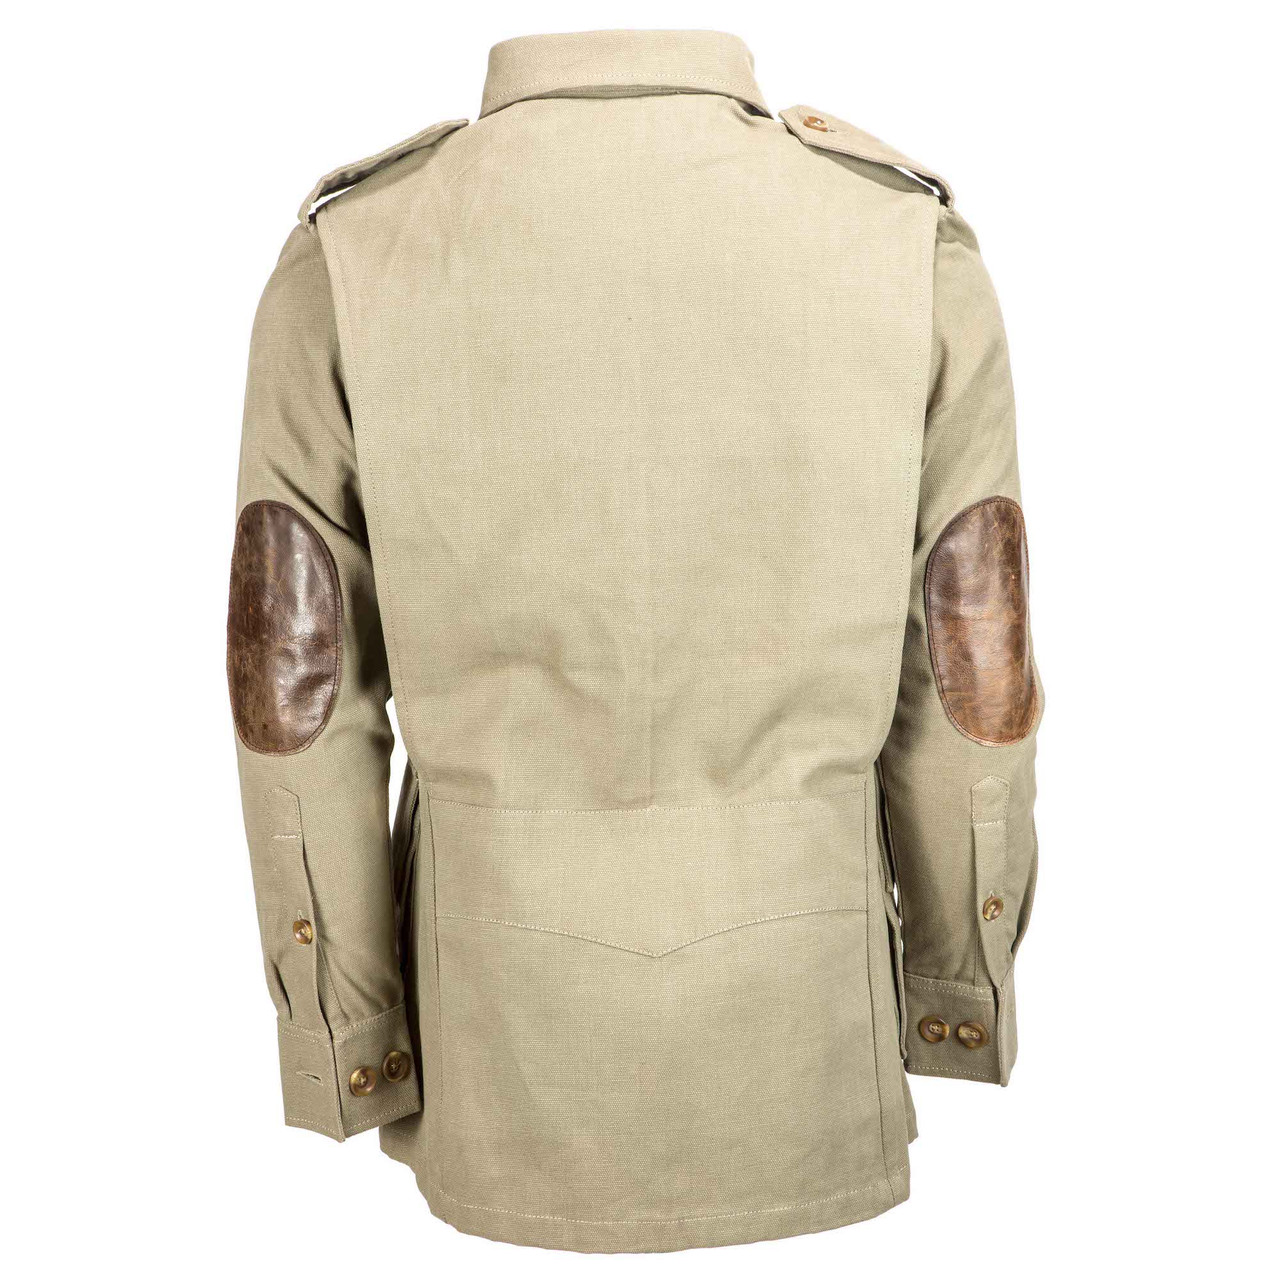 Rigby Safari Jacket38010 - Gordy & Sons Outfitters